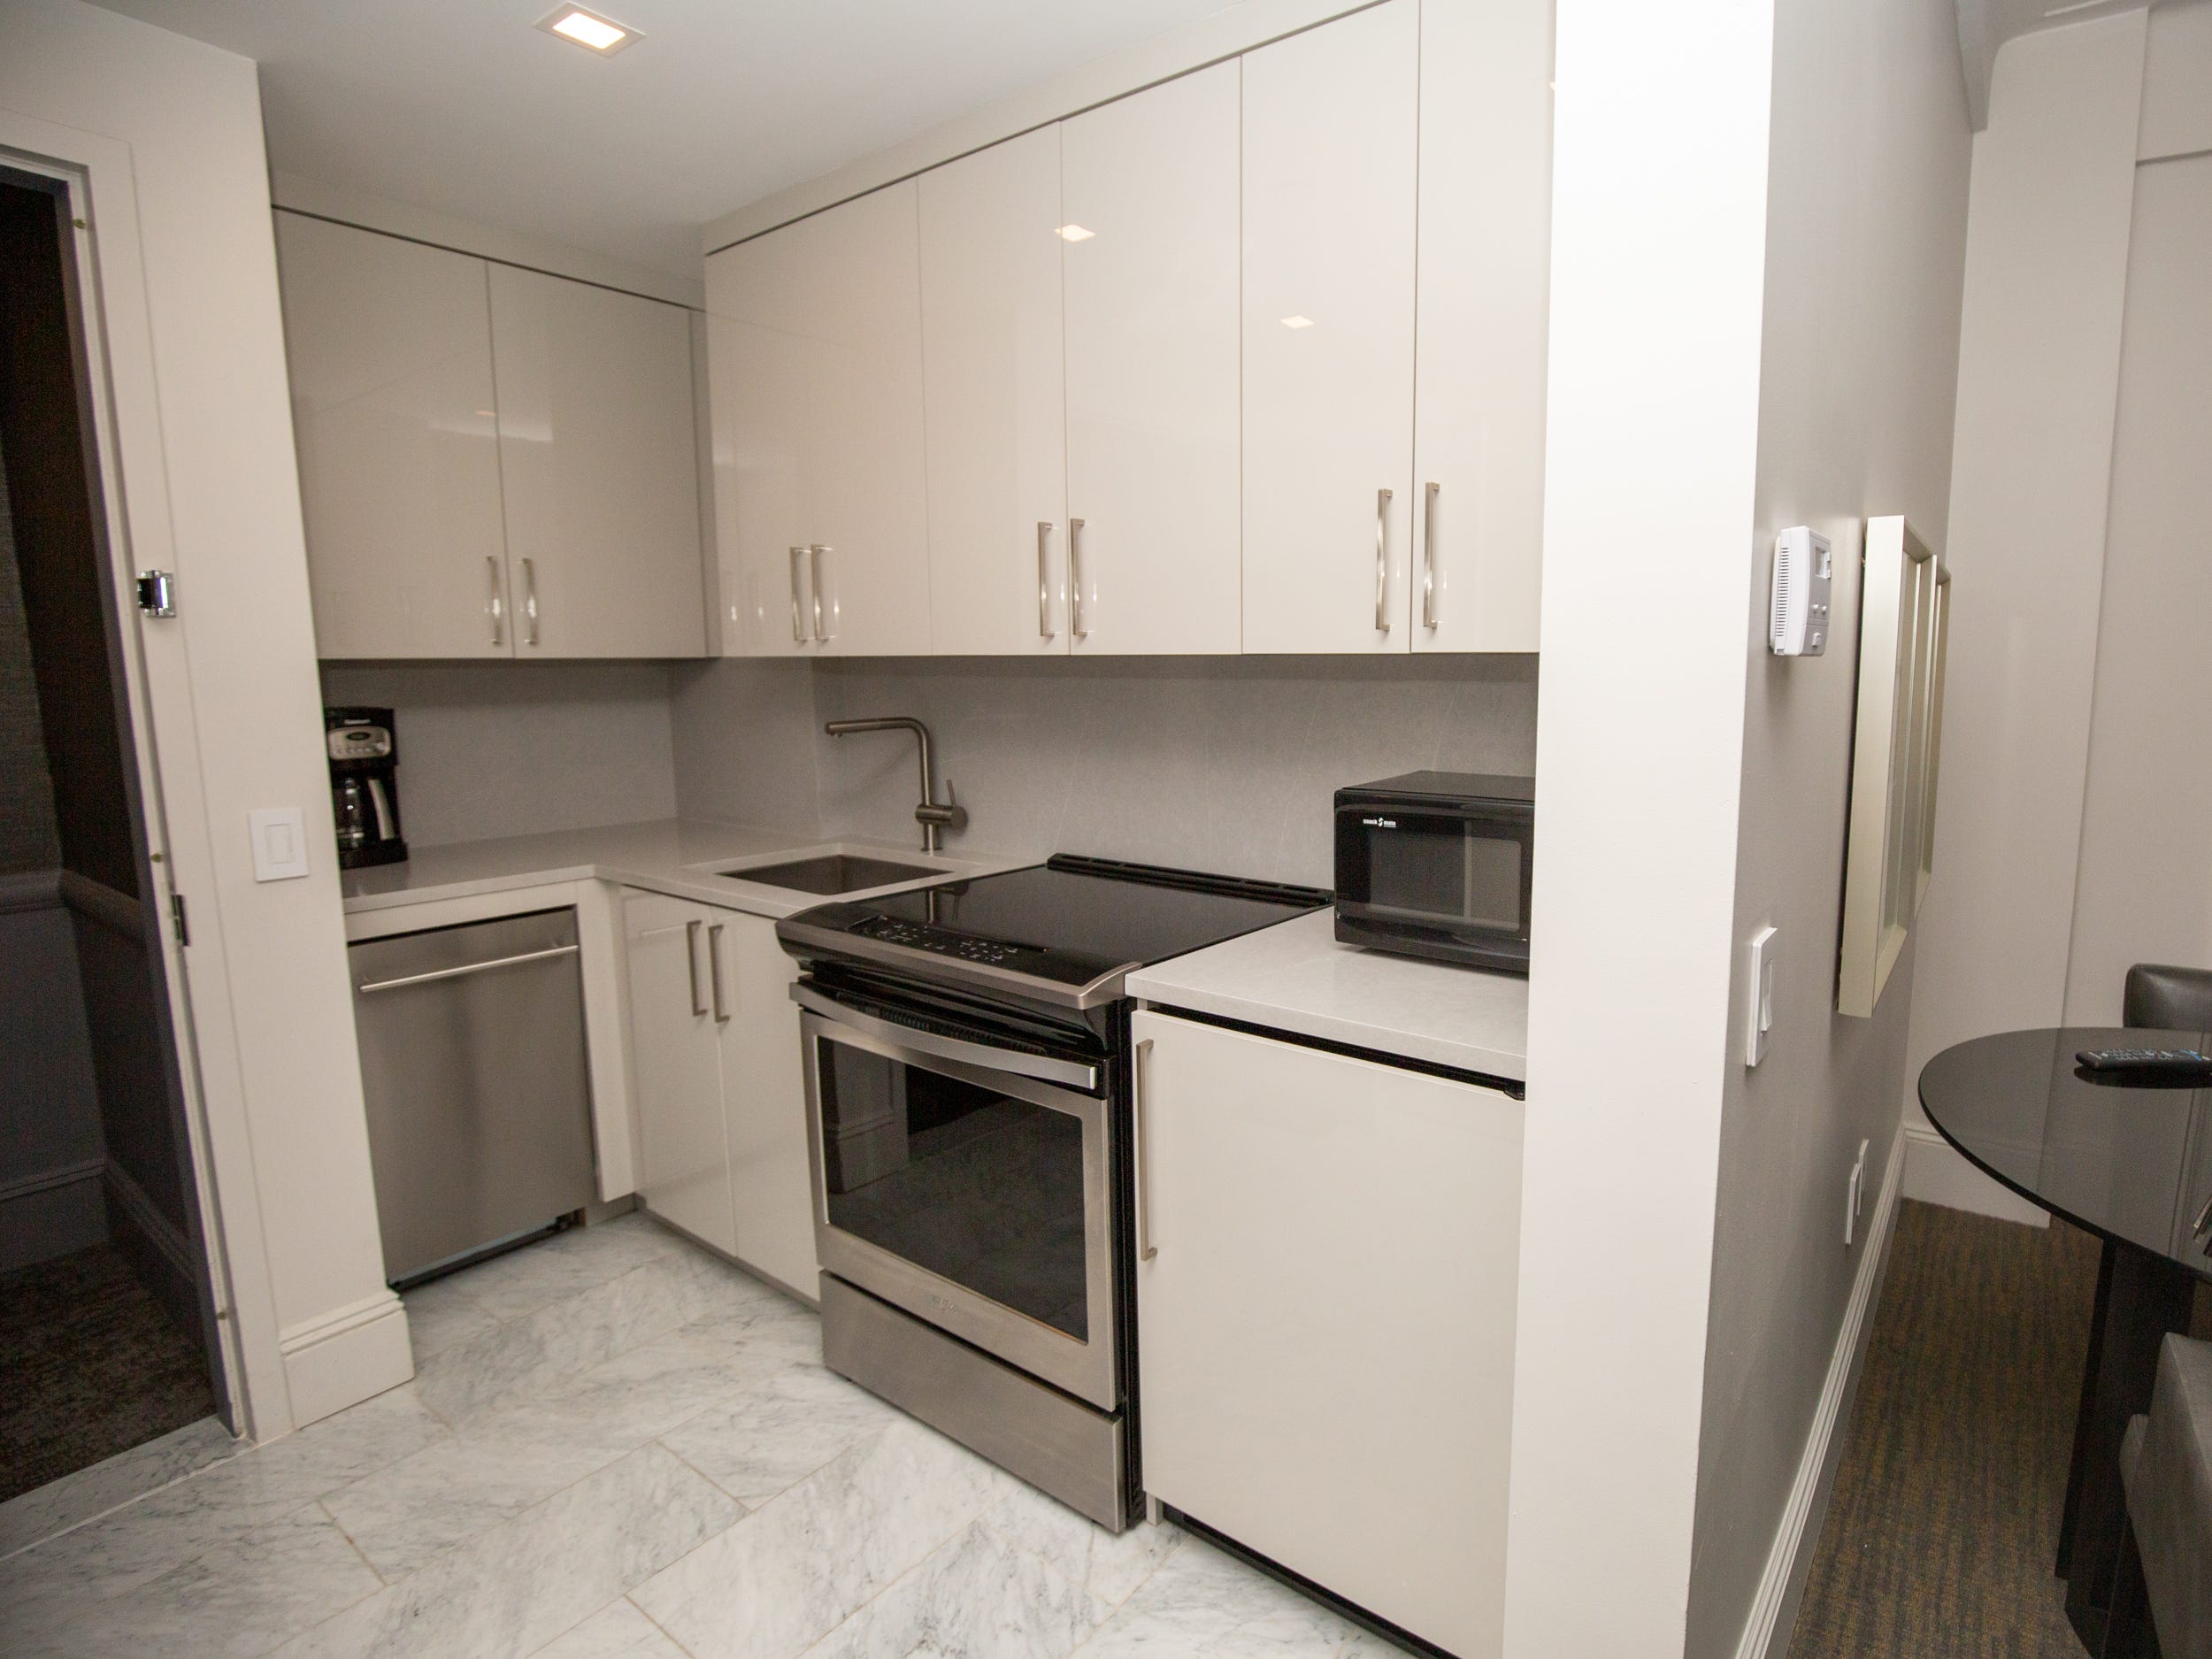 The kitchen with an oven, stove, microwave, sink, and cabinets inside a suite at AKA Central Park.